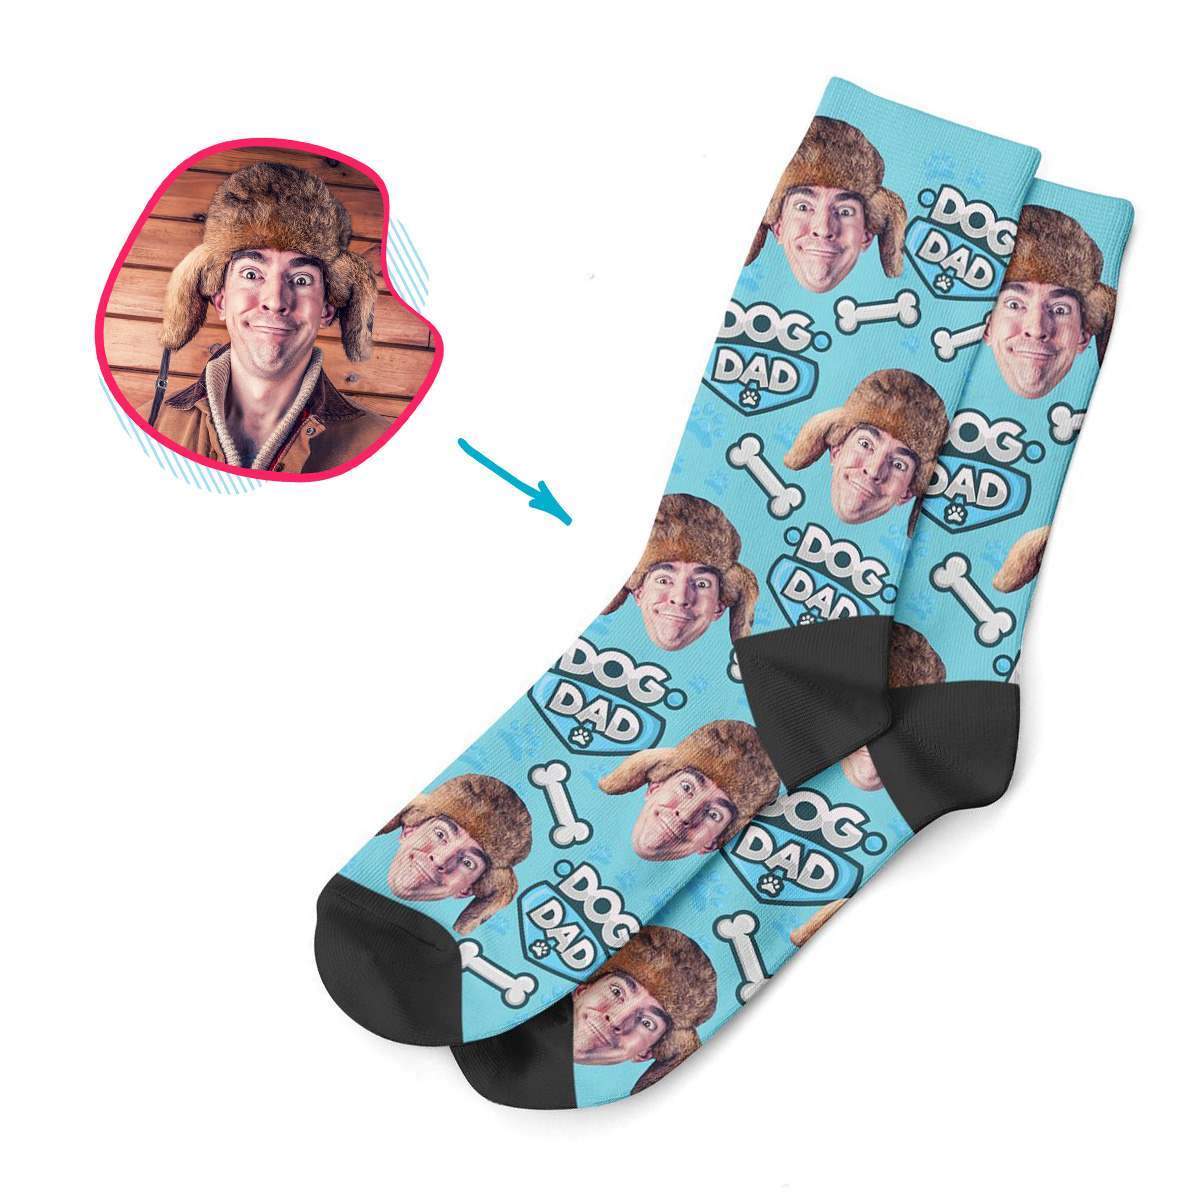 blue Dog Dad socks personalized with photo of face printed on them